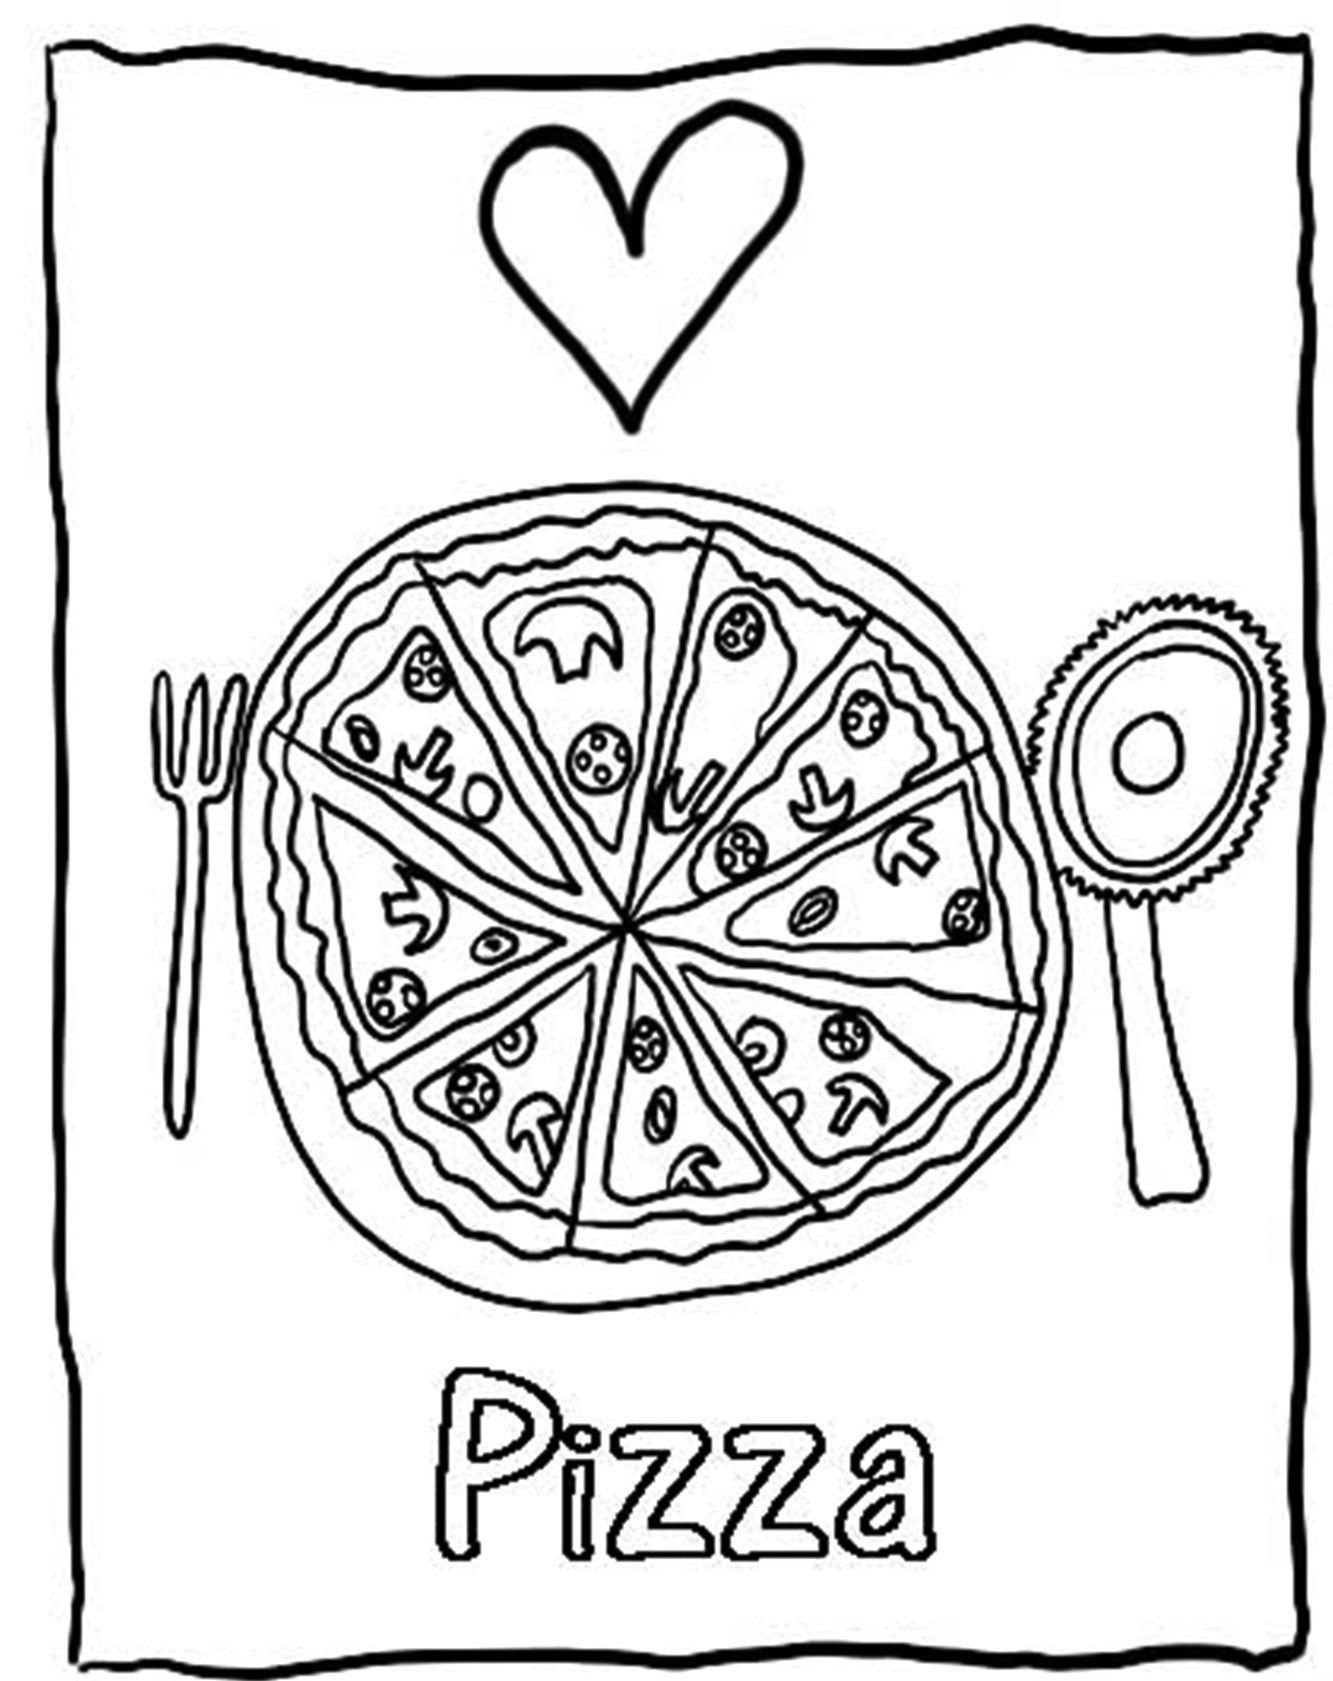 Pizza Coloring Book for kids ages 8-12: Fun with Coloring